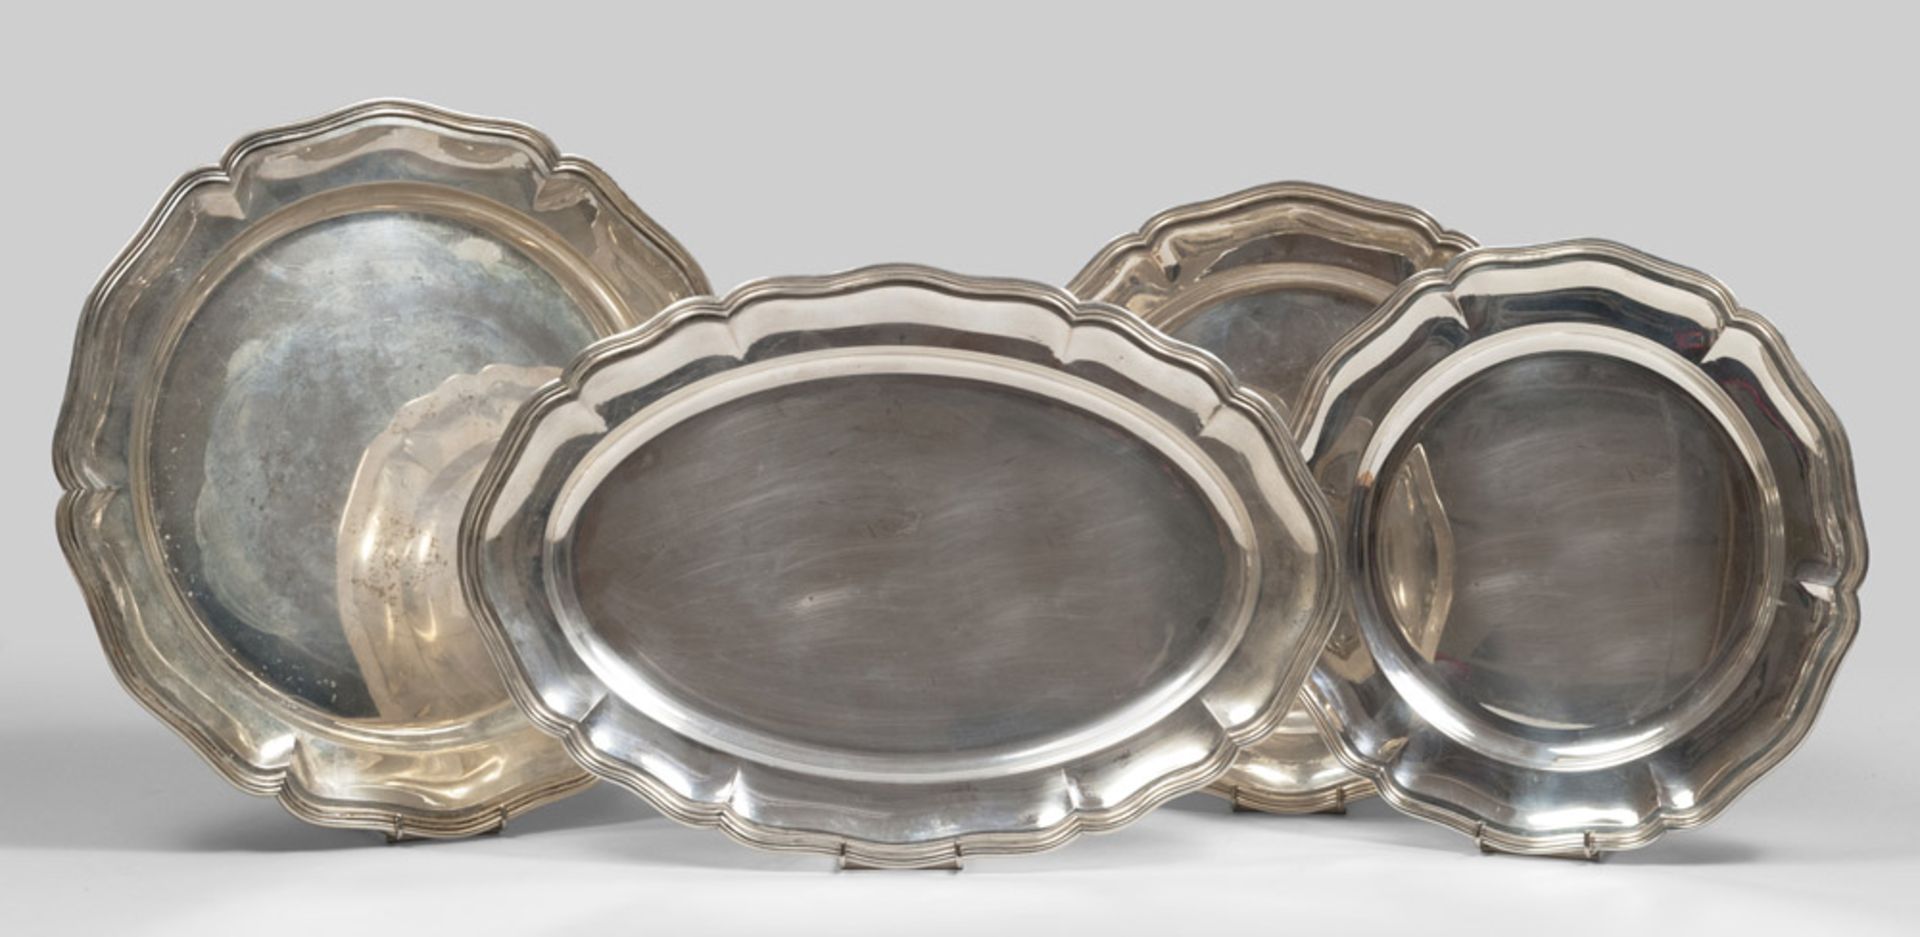 Three silver serving dishes and tray, 20th century. measures cm. 47 x 32, total weight gr. 4137.